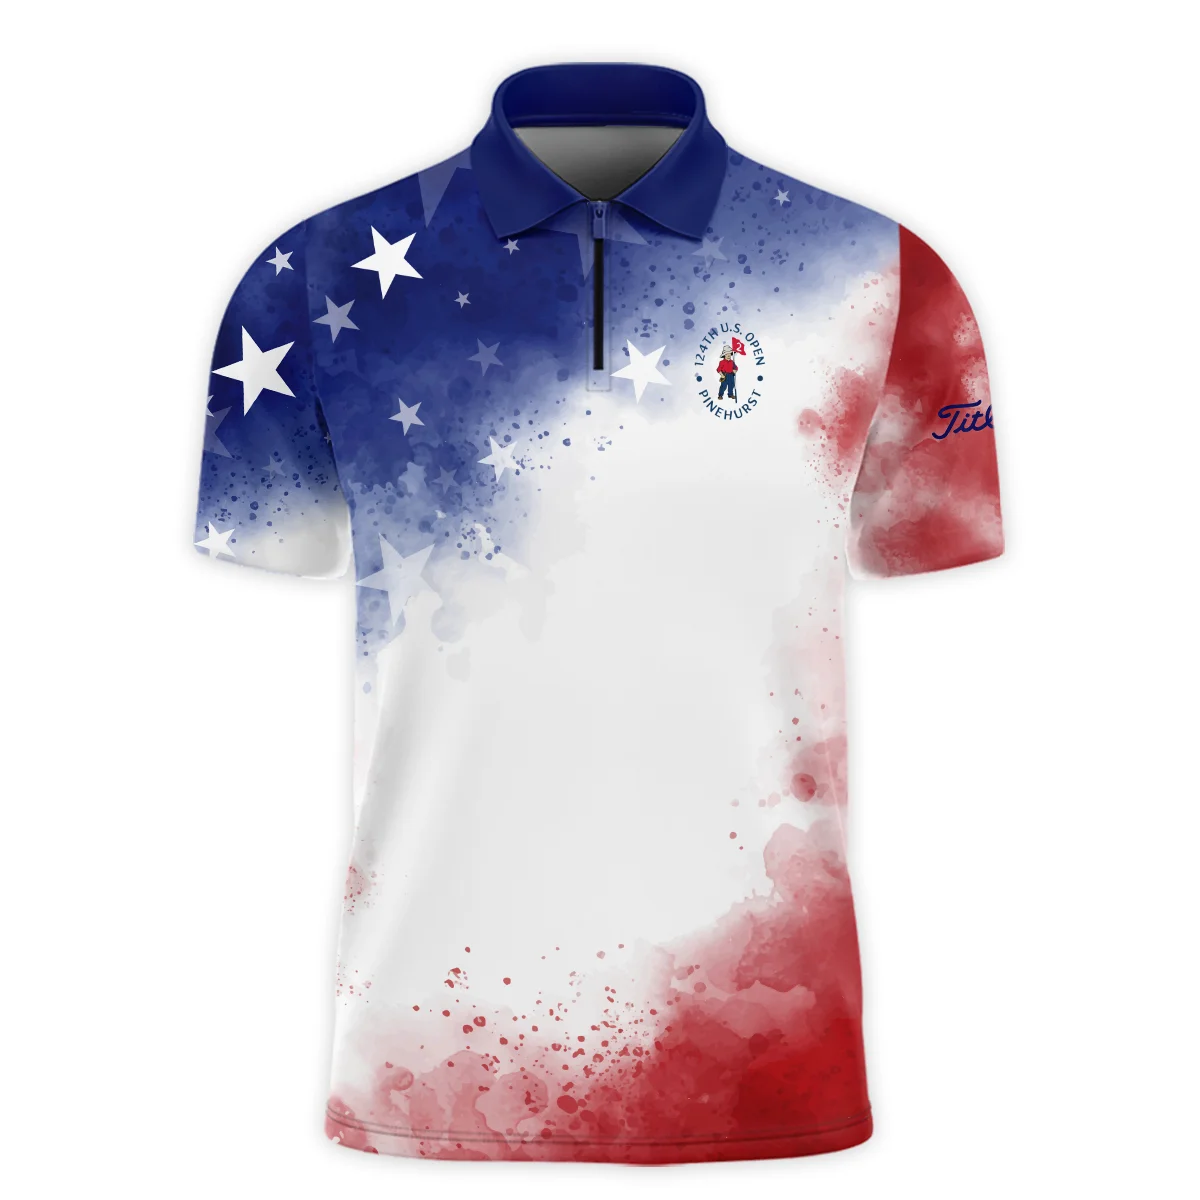 124th U.S. Open Pinehurst Titleist Blue Red Watercolor Star White Backgound Vneck Polo Shirt Style Classic Polo Shirt For Men